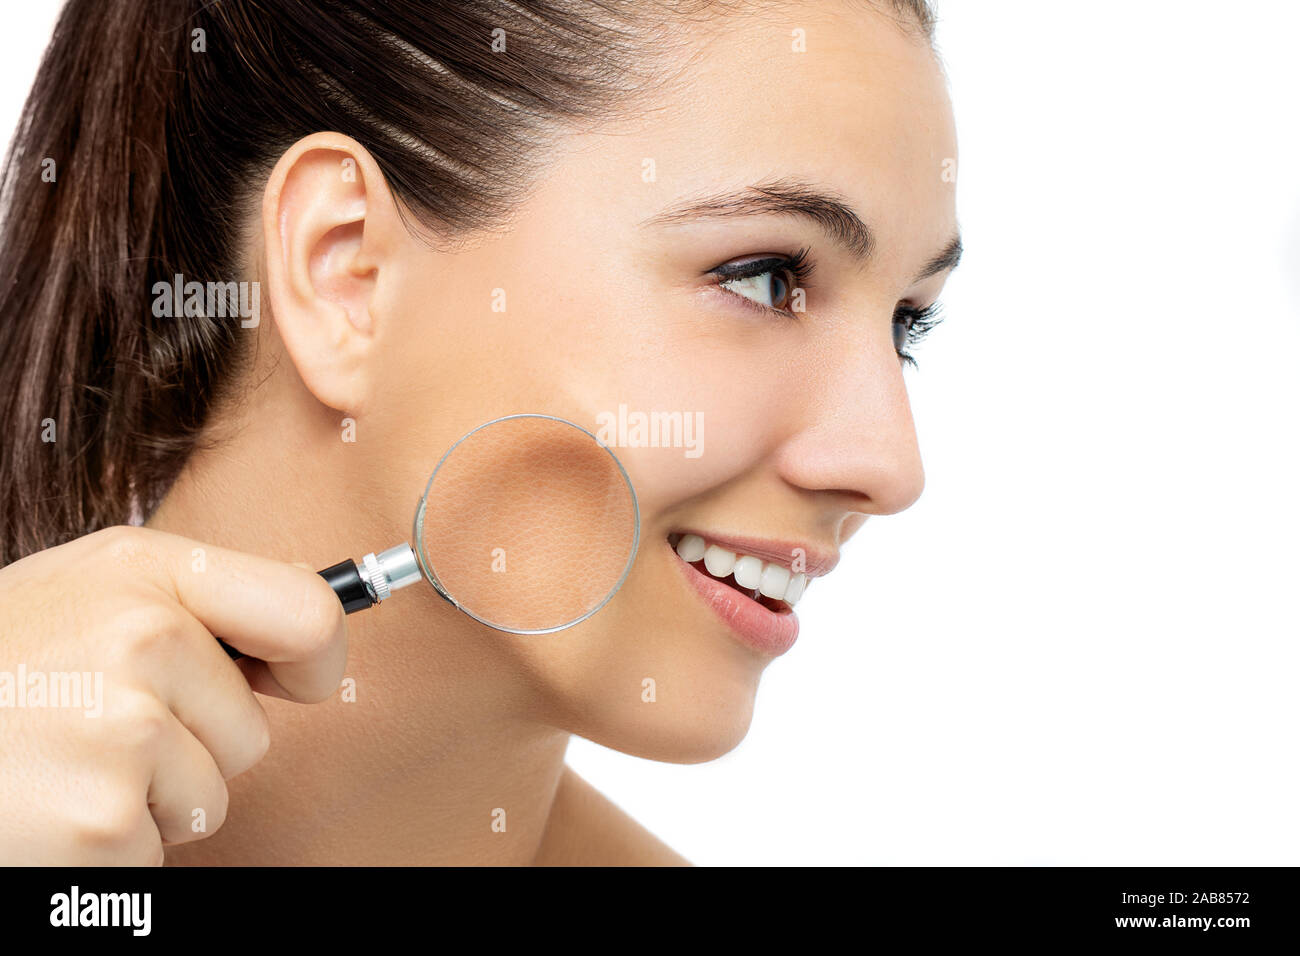 Close up conceptual portrait of young woman holding magnifying glass against cheek. Rough skin compared to smooth skin on face. Stock Photo